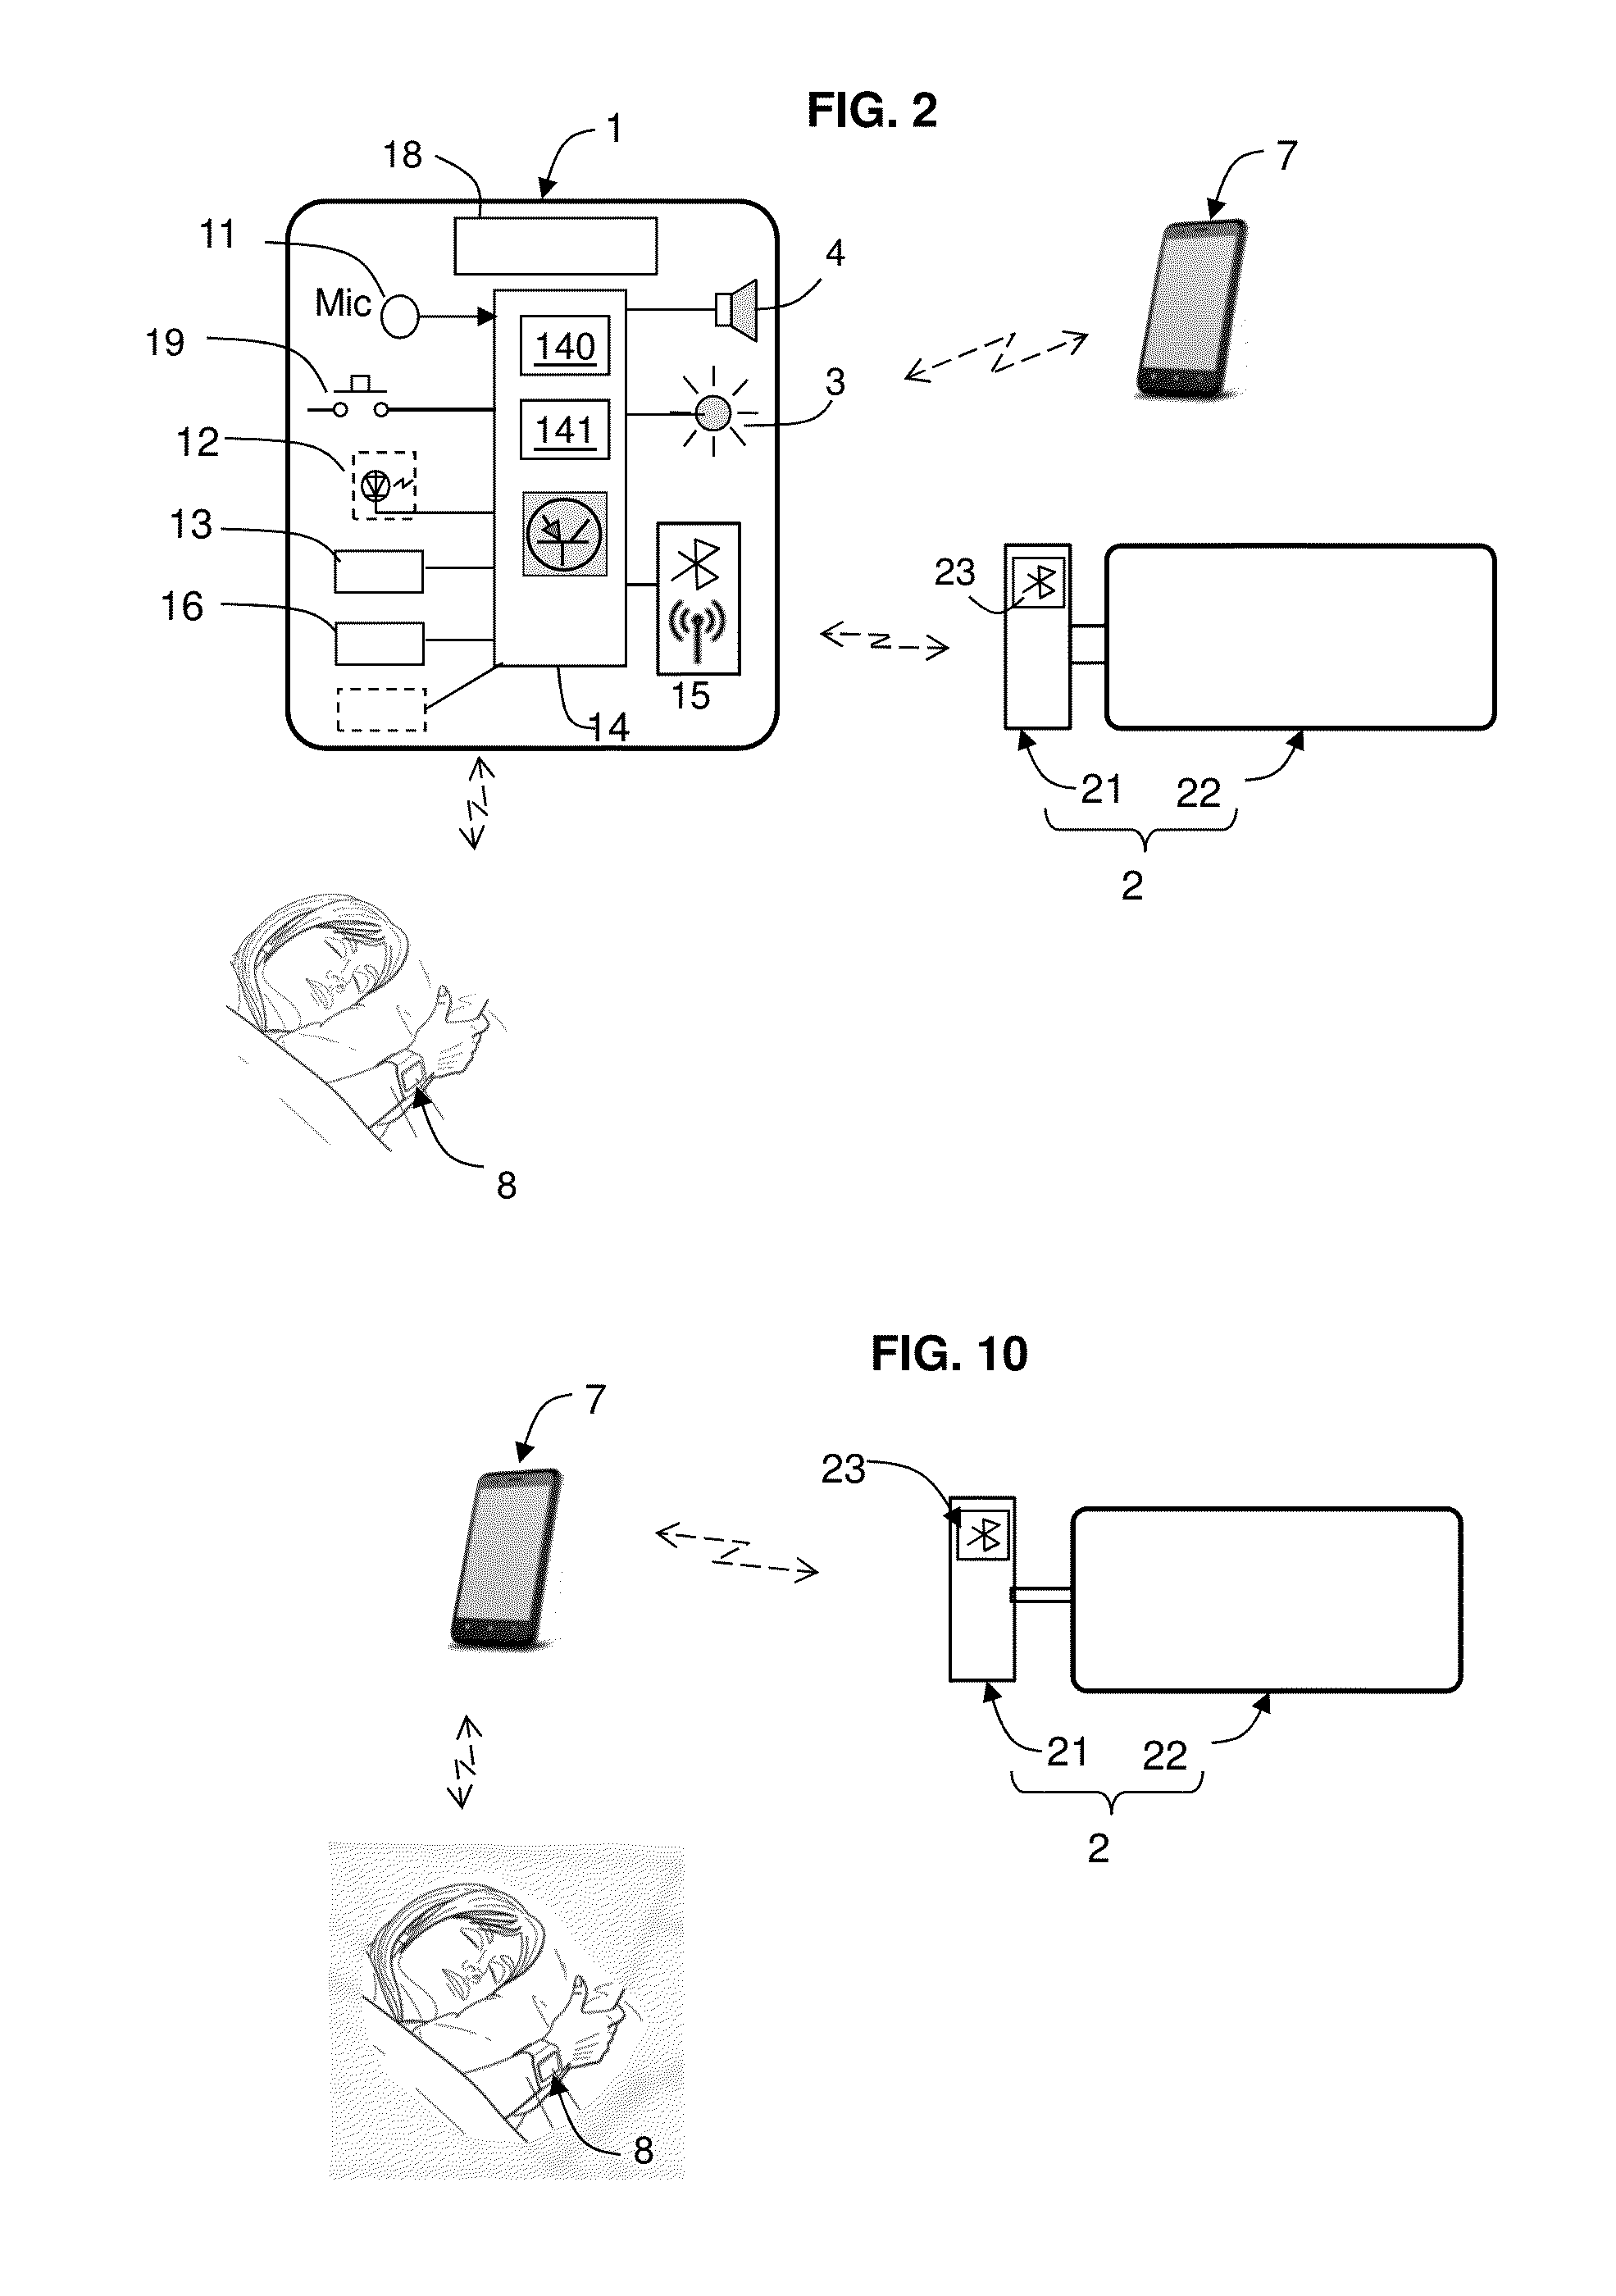 System and Method to Monitor and Assist Individual's Sleep